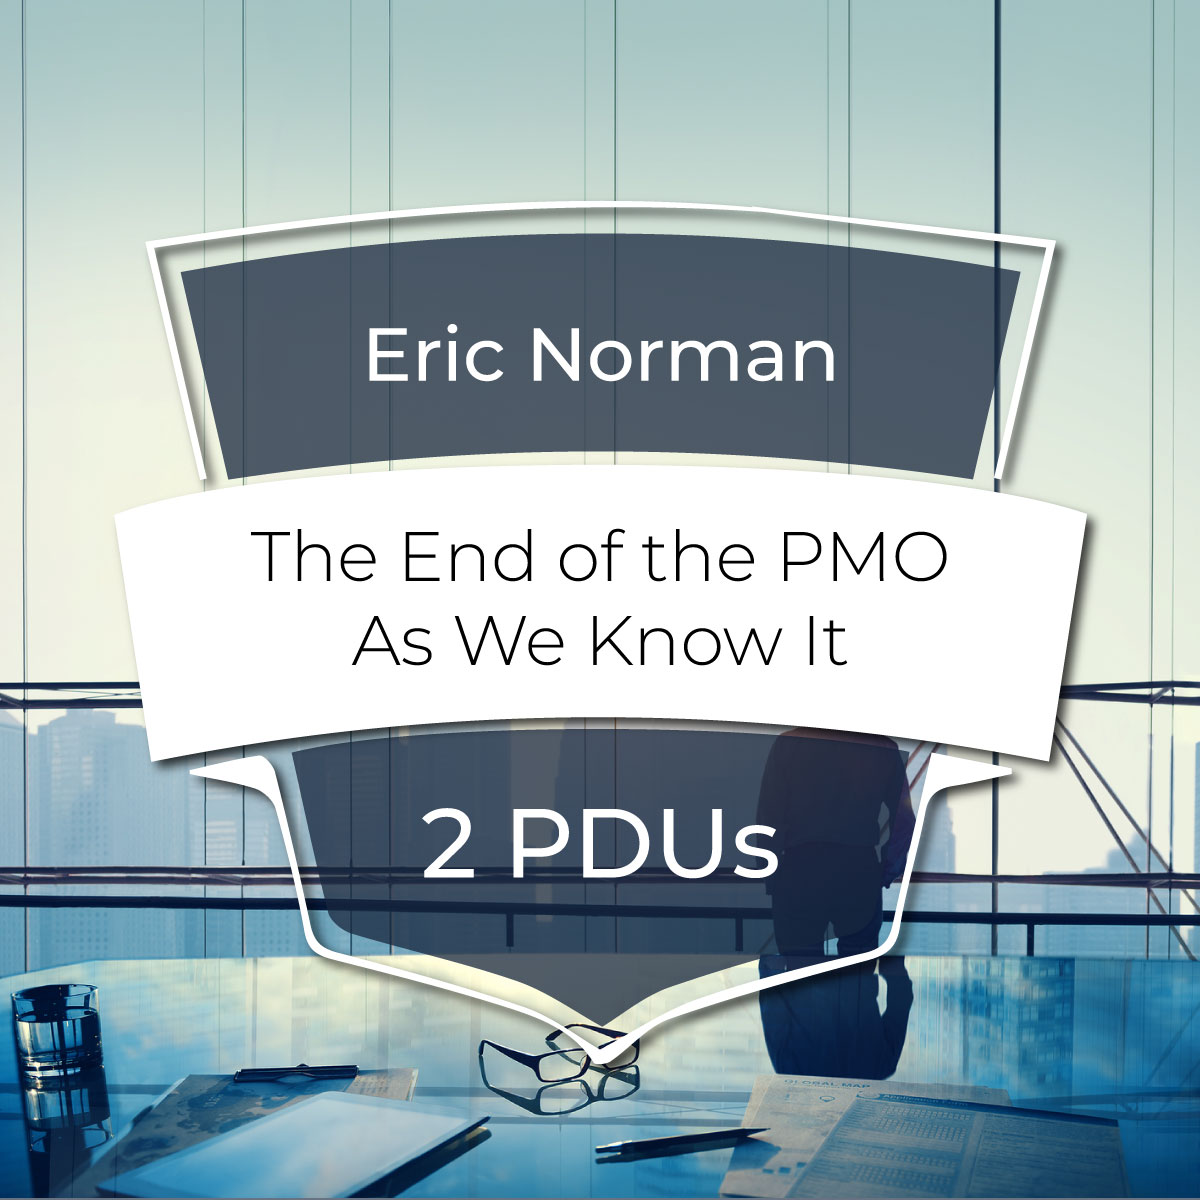 <p>The End of the PMO (as we know it)</p>
